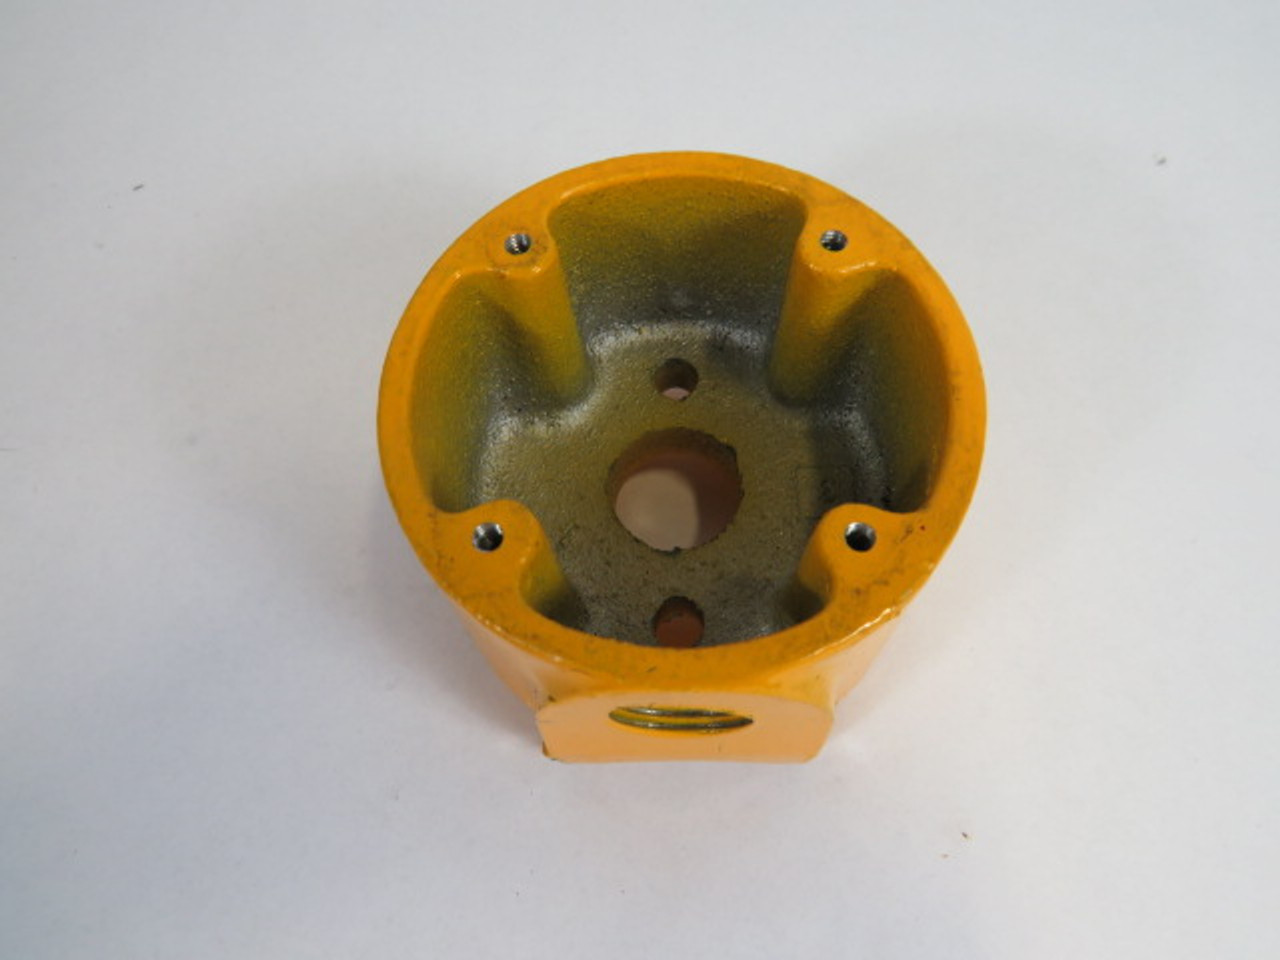 GTE Corp. PB-Y Yellow Pedestrian Push Button Cup USED